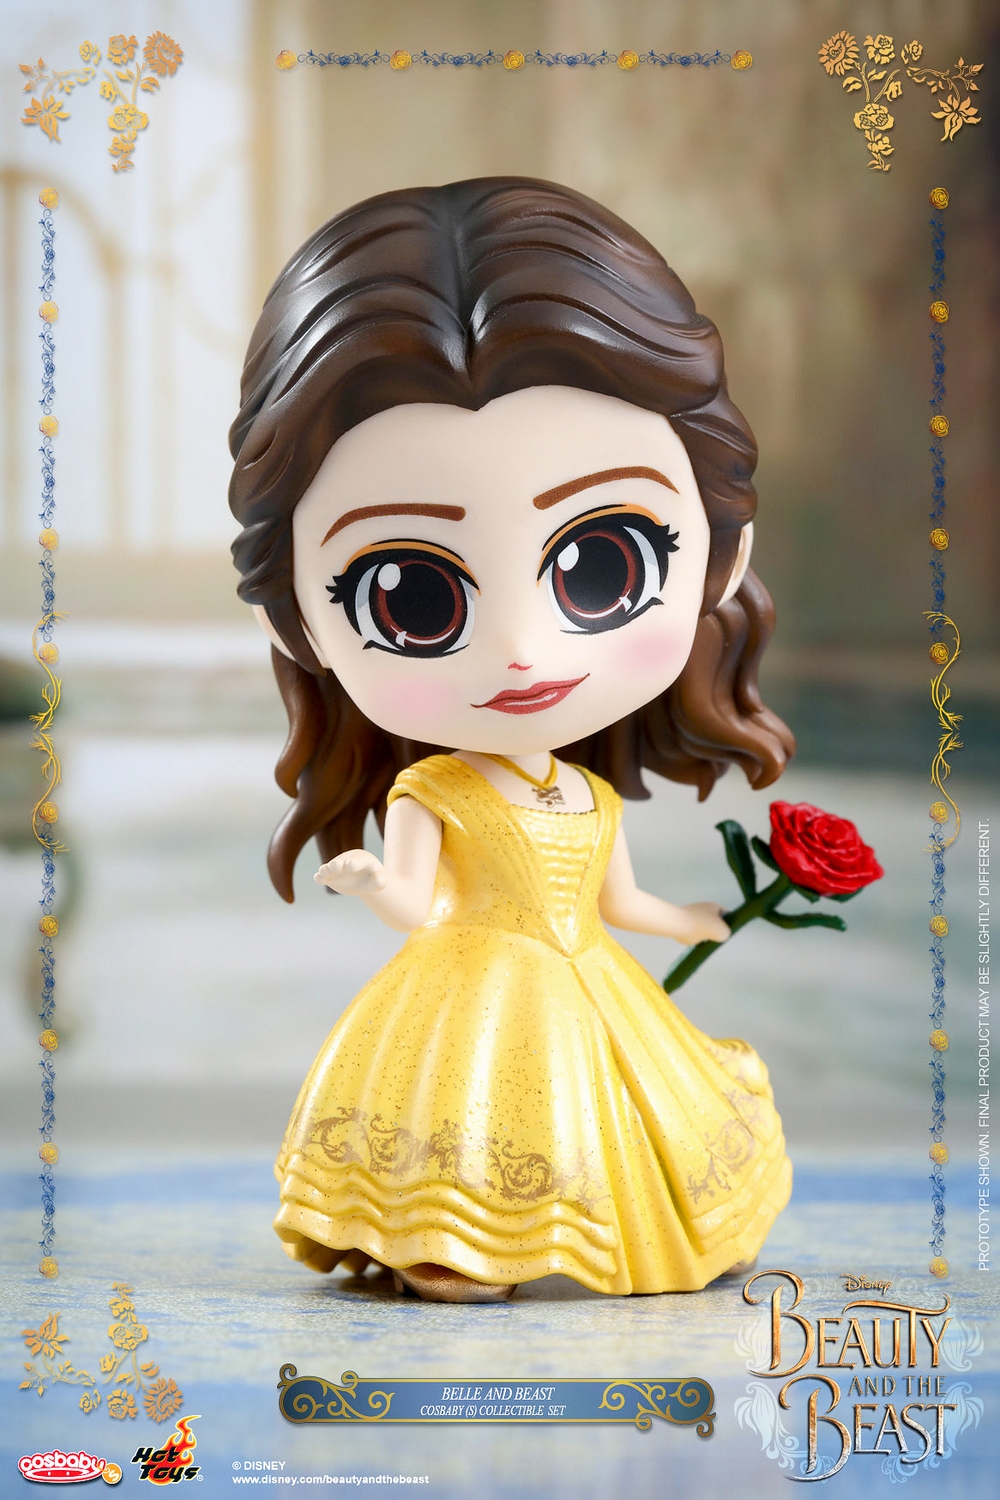 Hot-Toys-COSB352-353-Beauty-and-the-Beast-Cosbaby-008.jpg